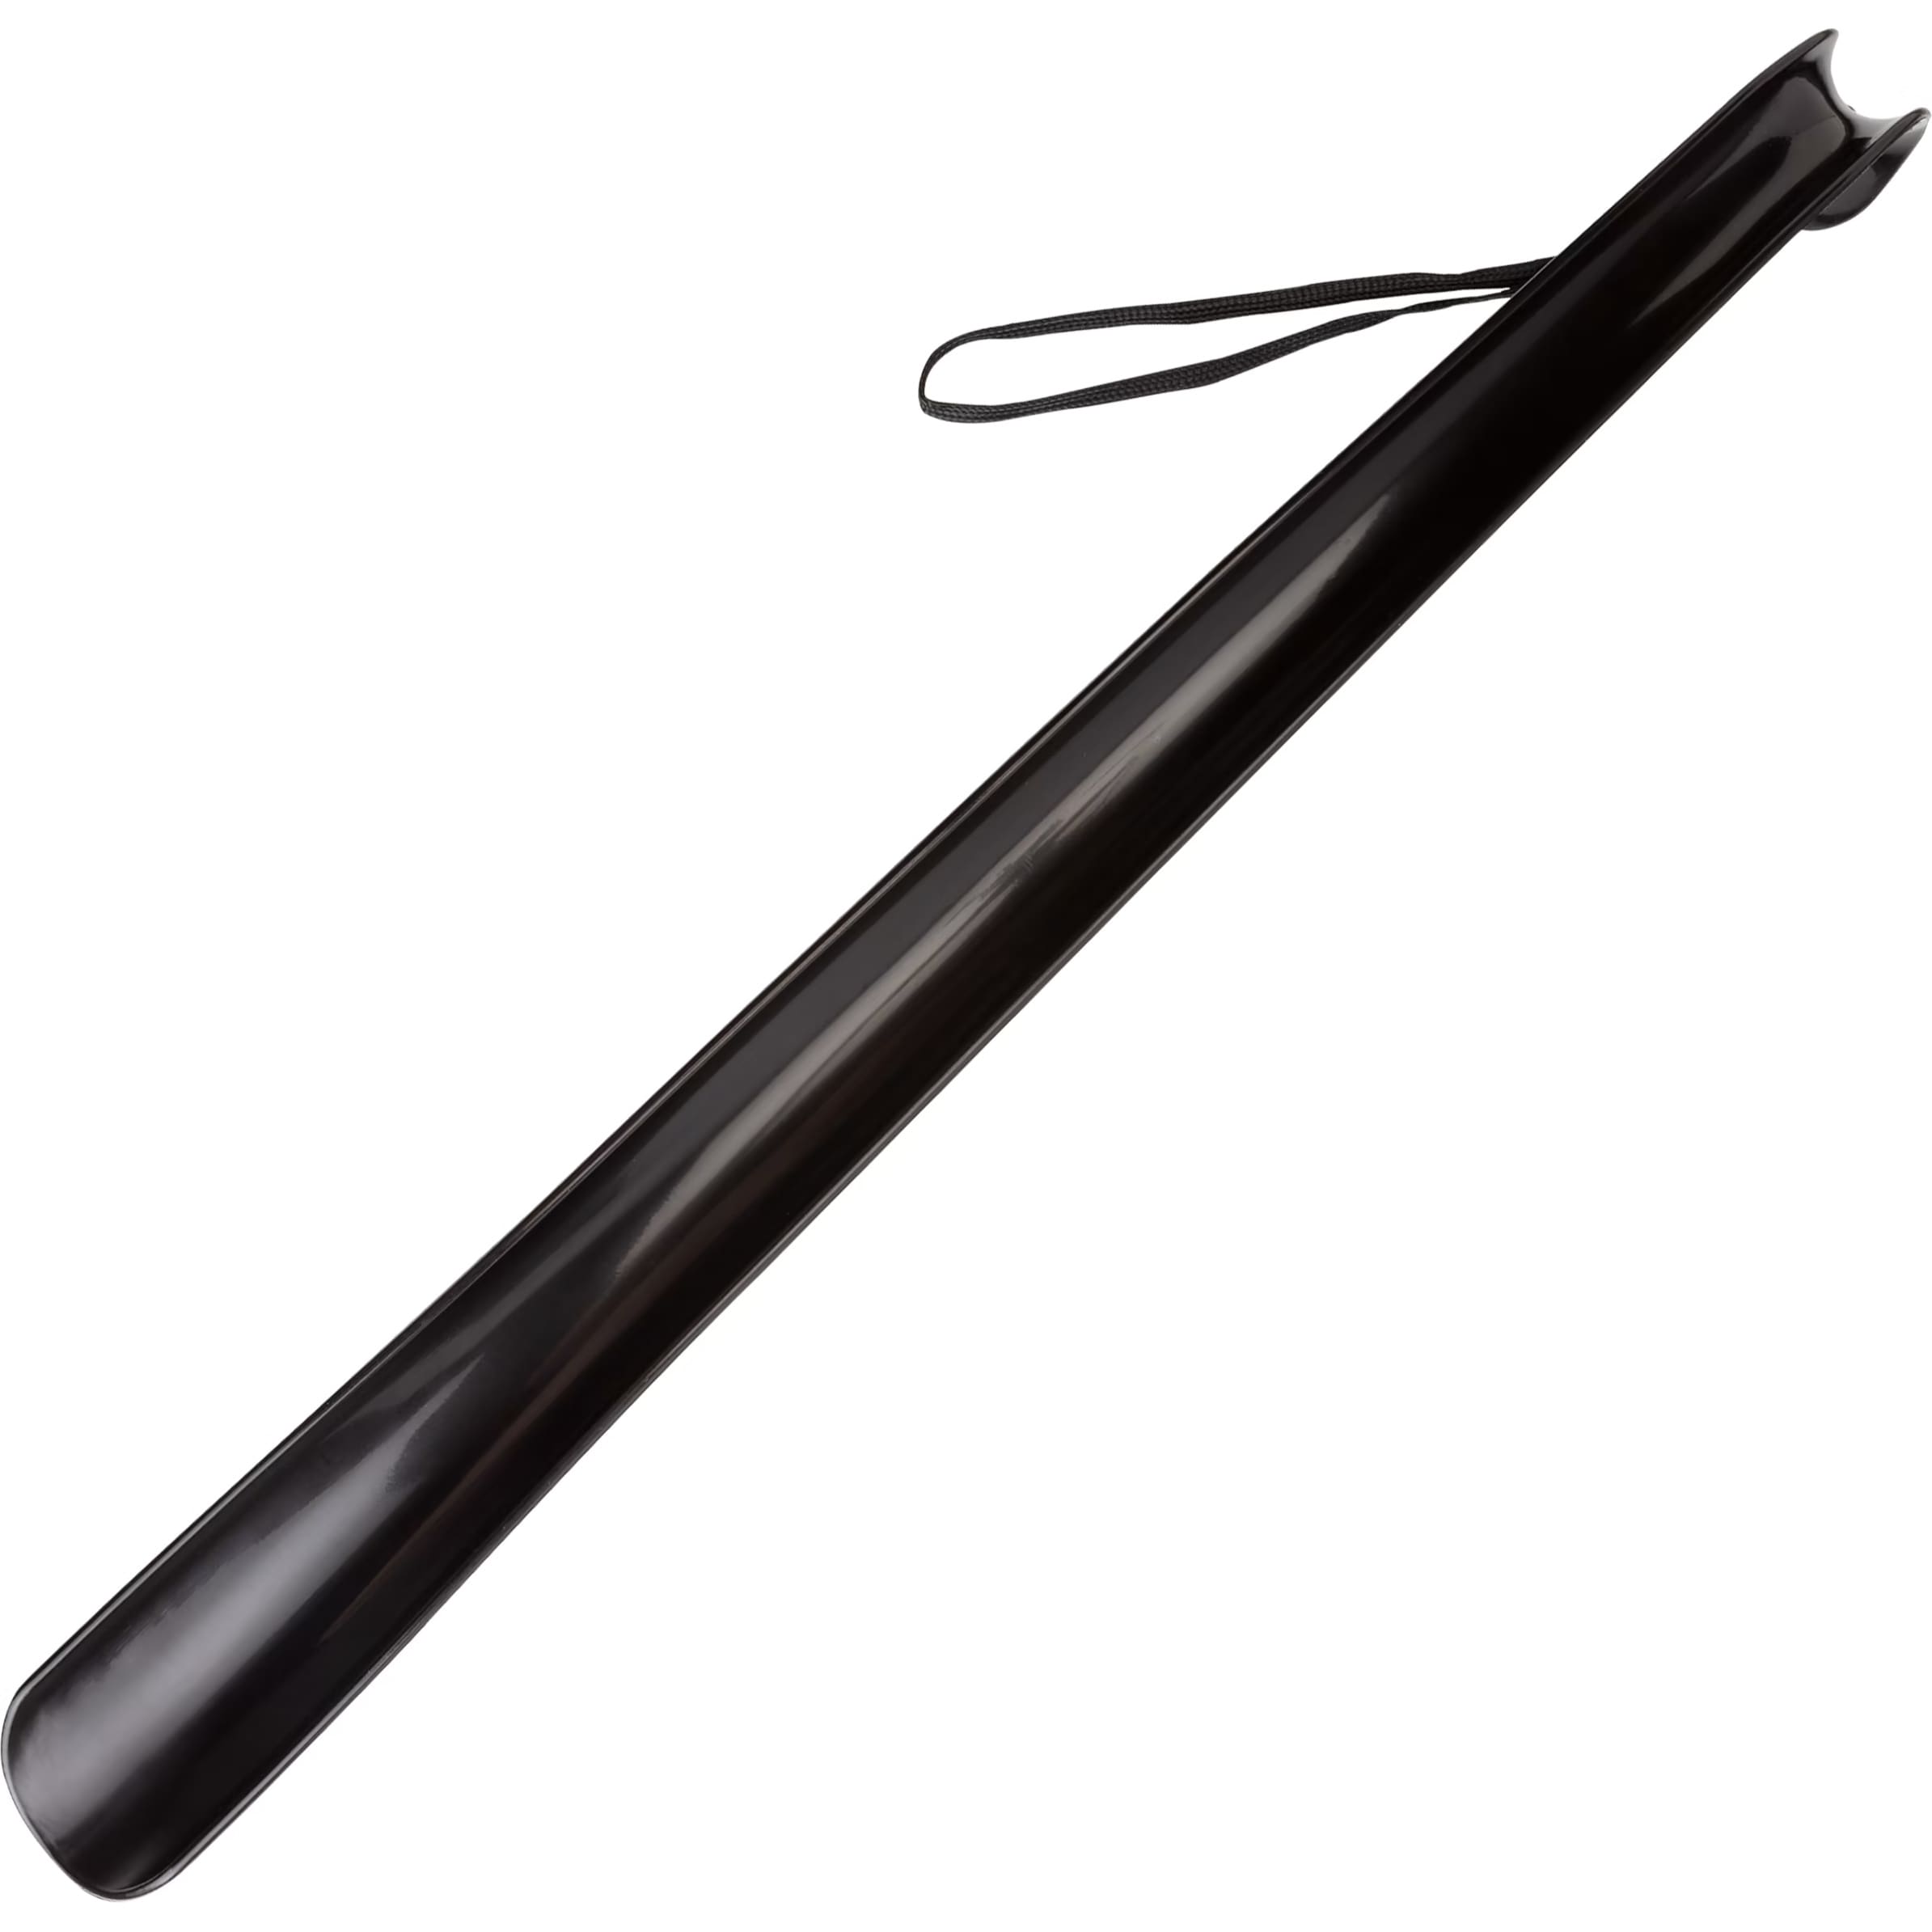 Sof Sole® 18" Shoe Horn